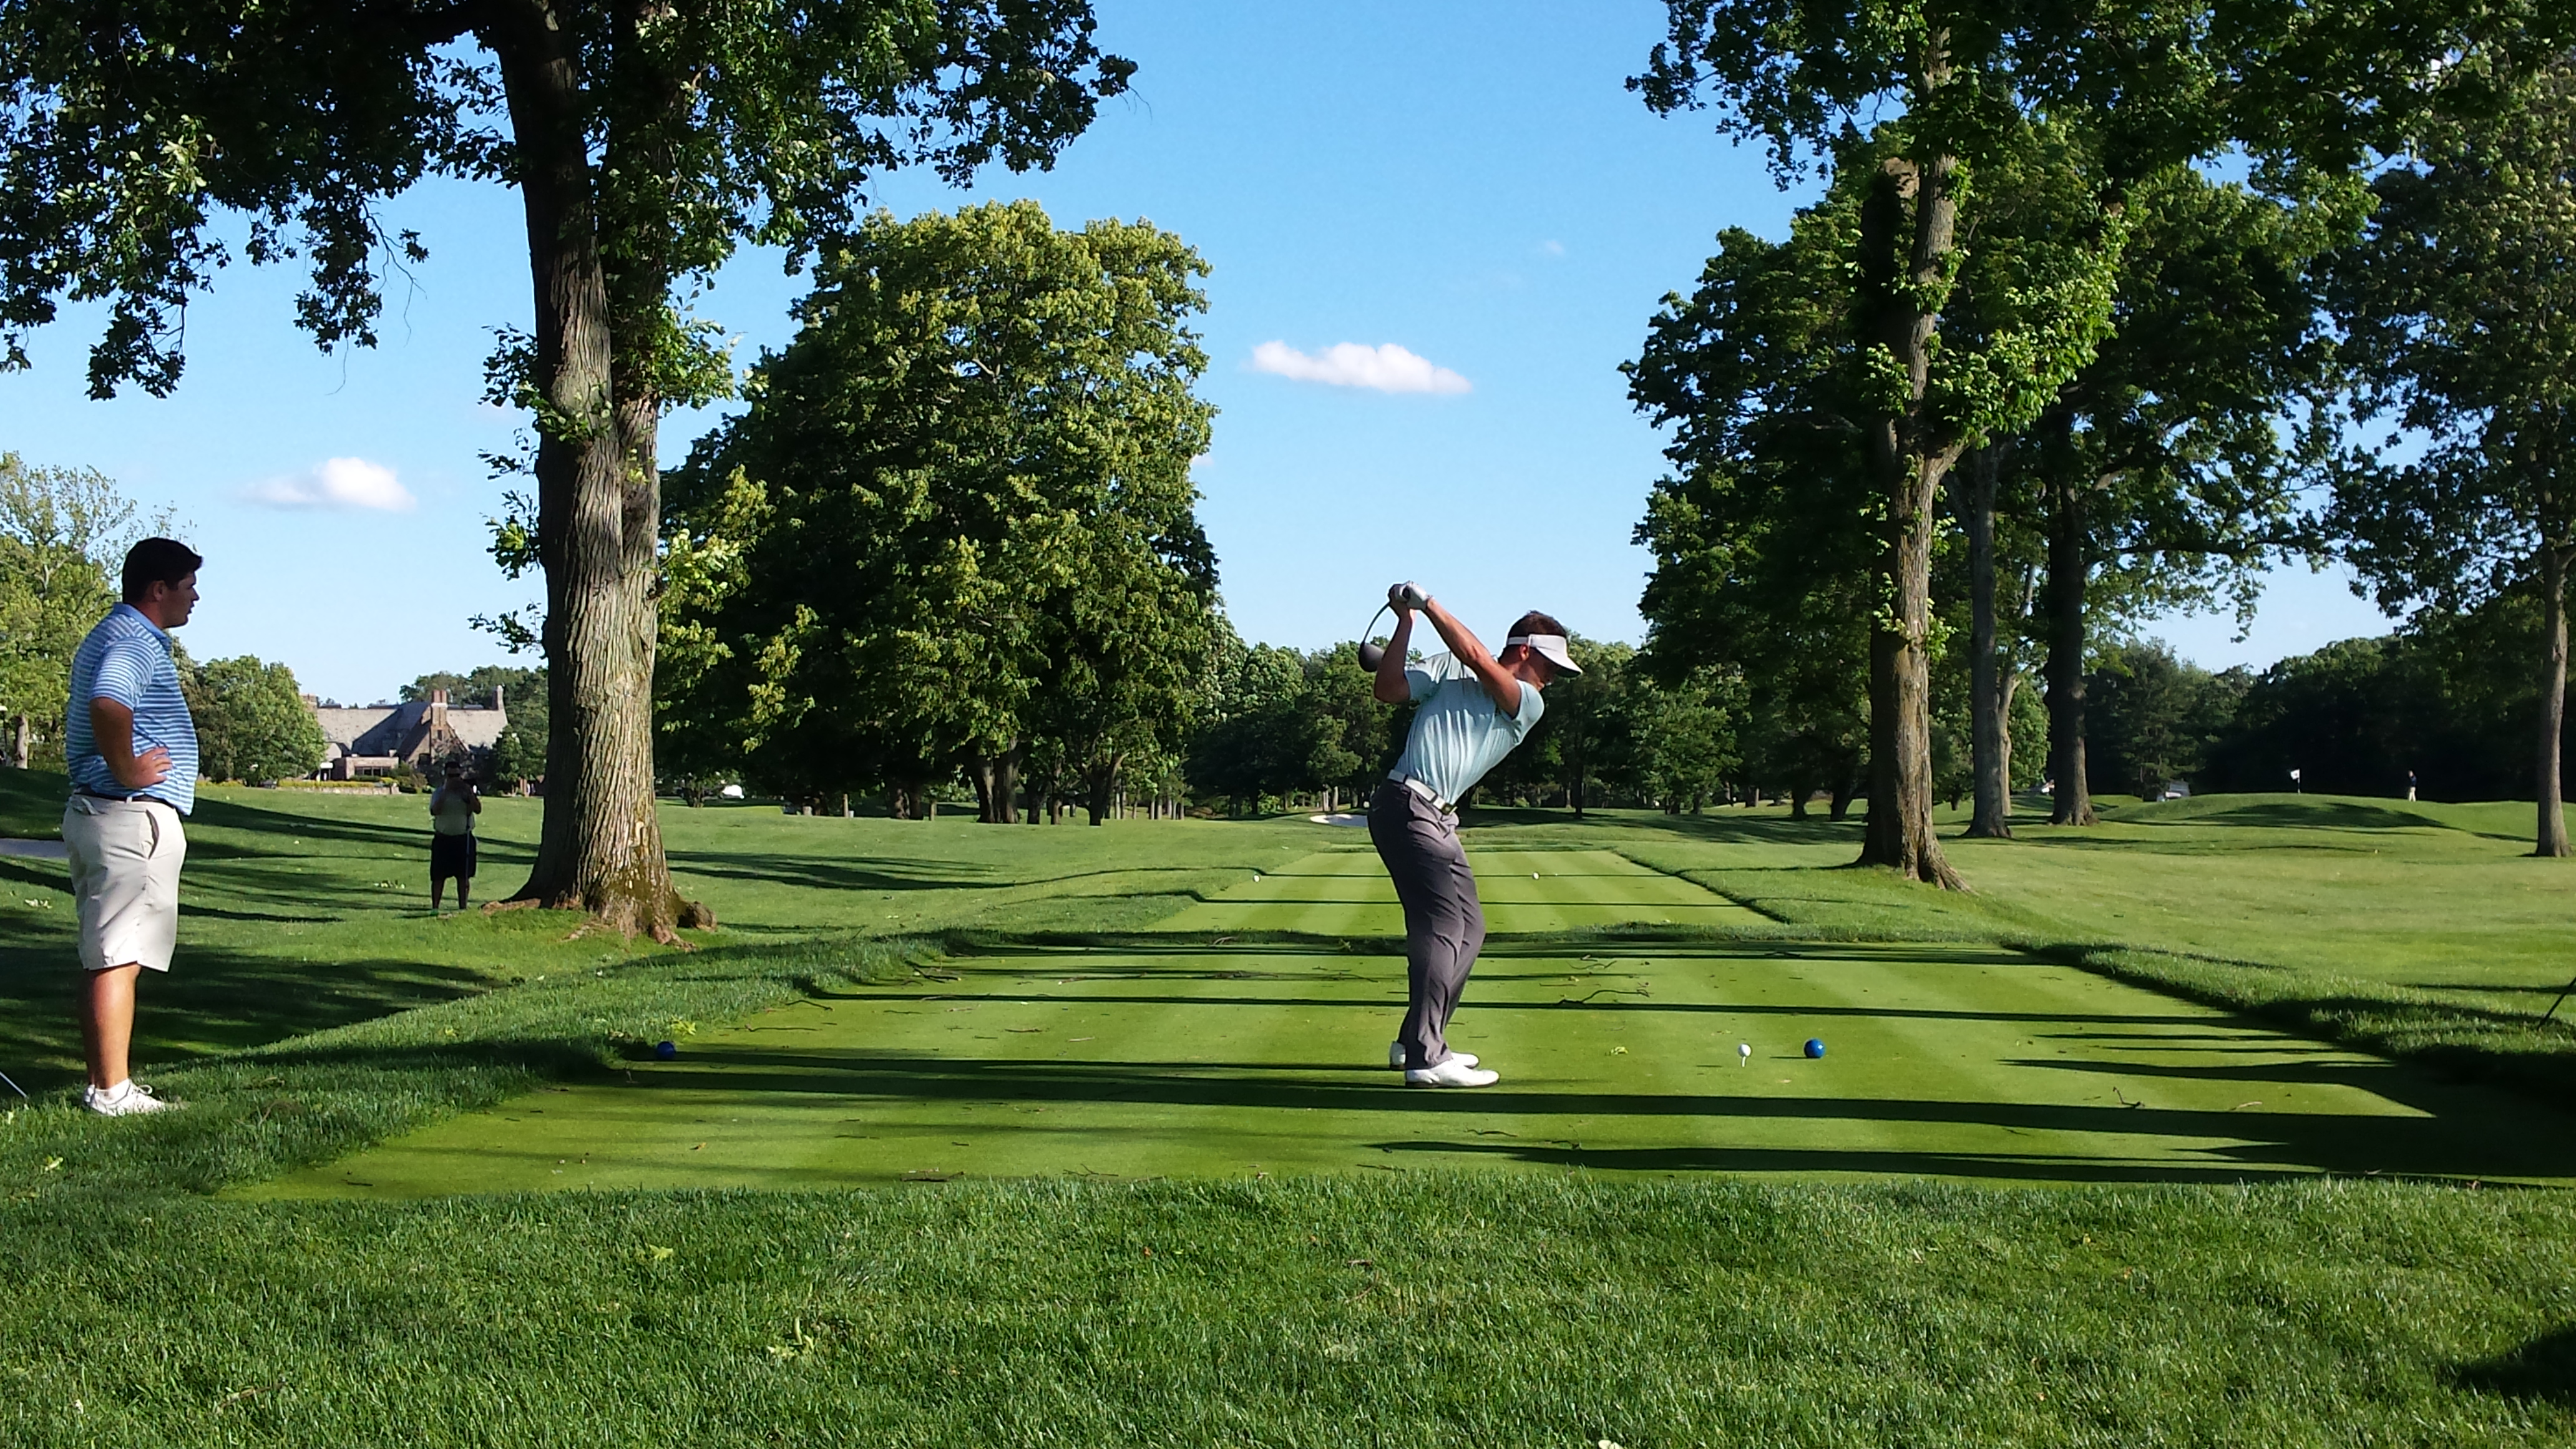 No. 18 at Winged Foot's West Course